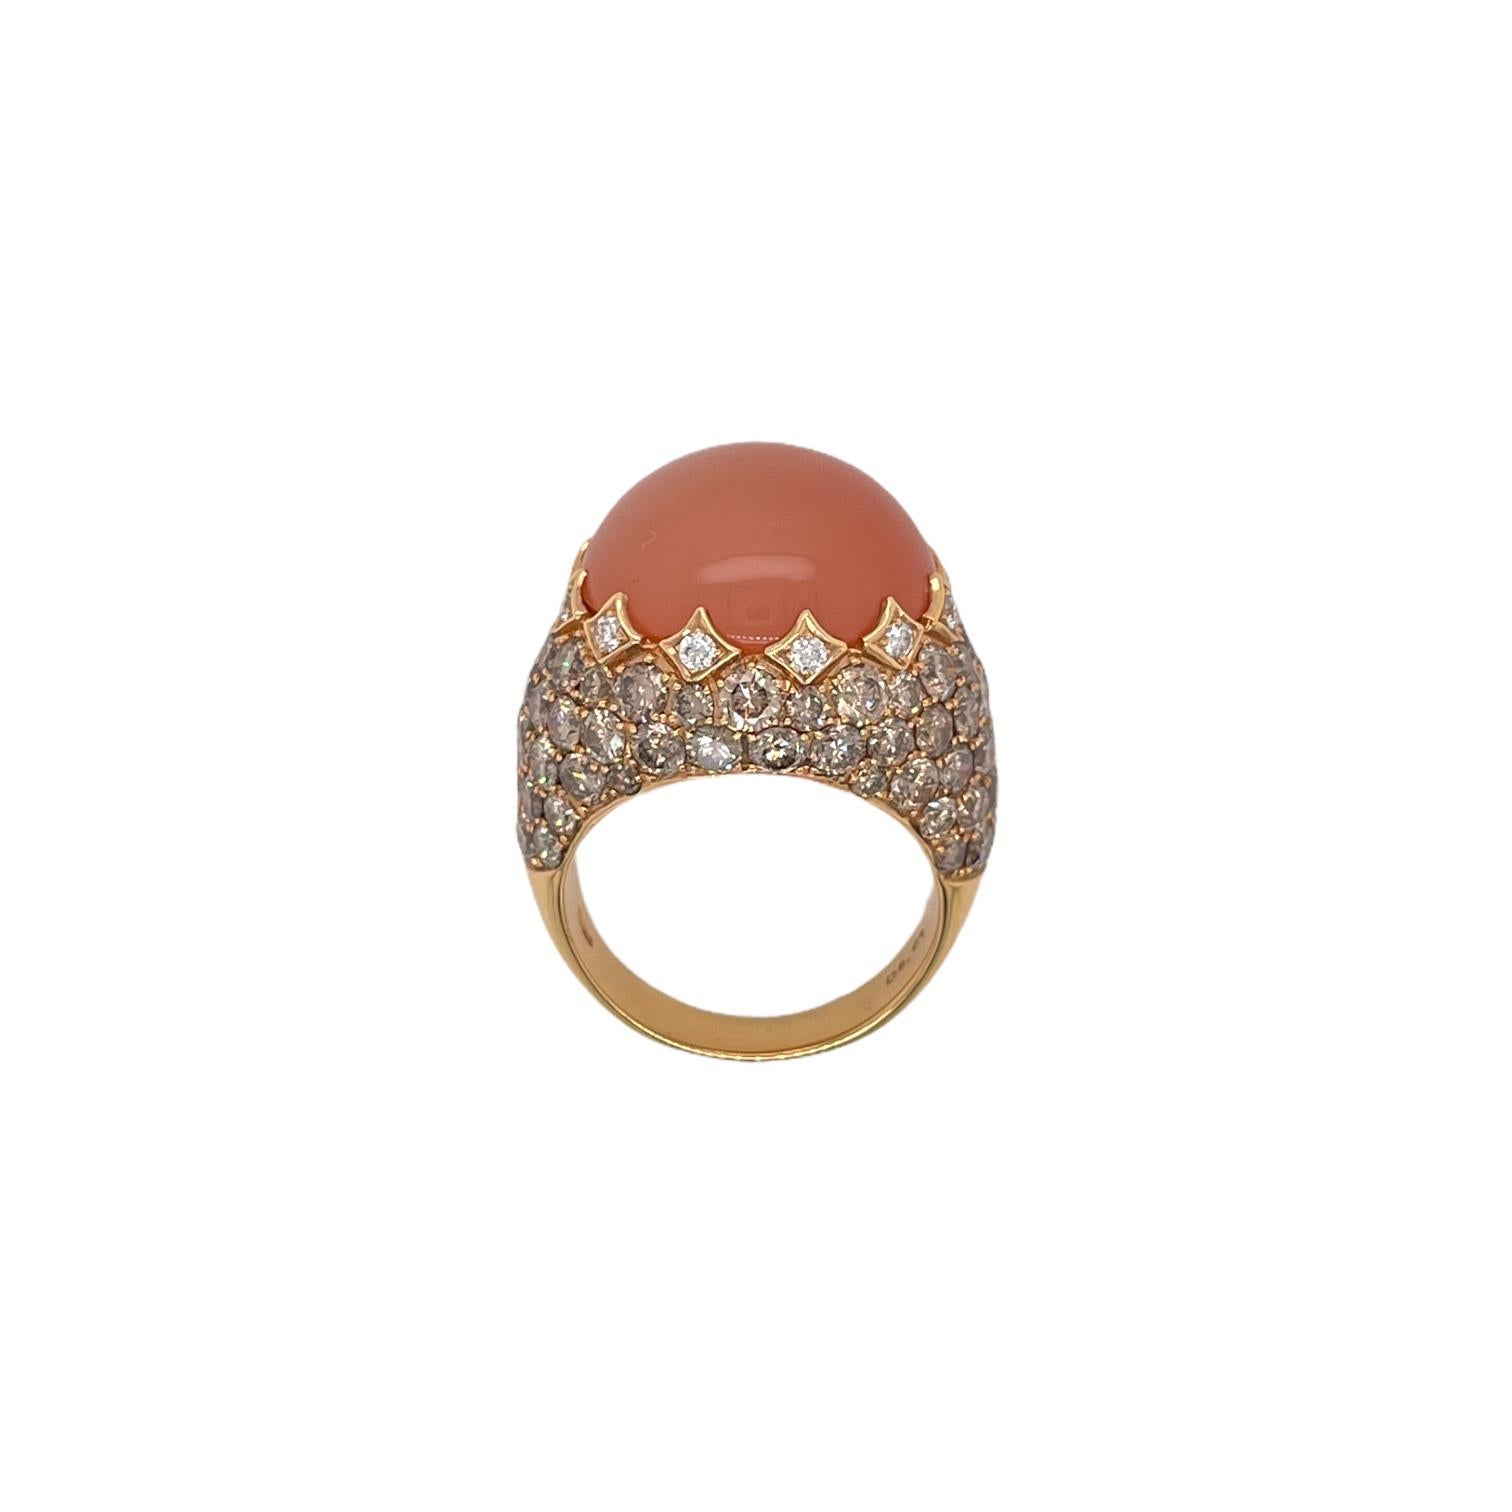 Elegant orange moonstone and champagne diamond cocktail ring in 18k yellow gold. Ring contains 1 round cabochon cut orange moonstone, 17.61ct. Center stone is accented by champagne diamonds, 5.76tcw and white round brilliant diamonds, 0.25tcw. Ring